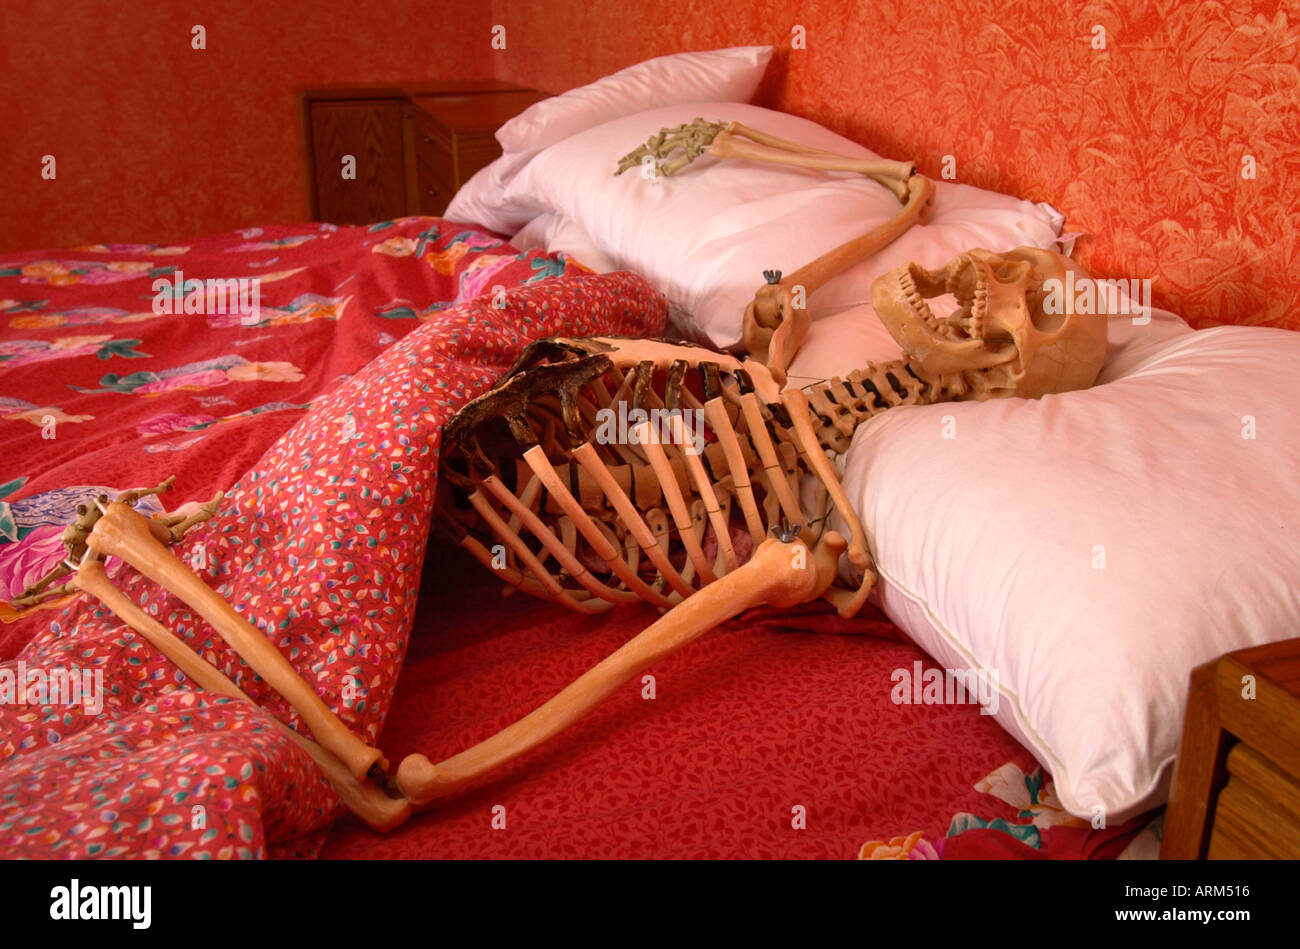 A SKELETON IN BED Stock Photo